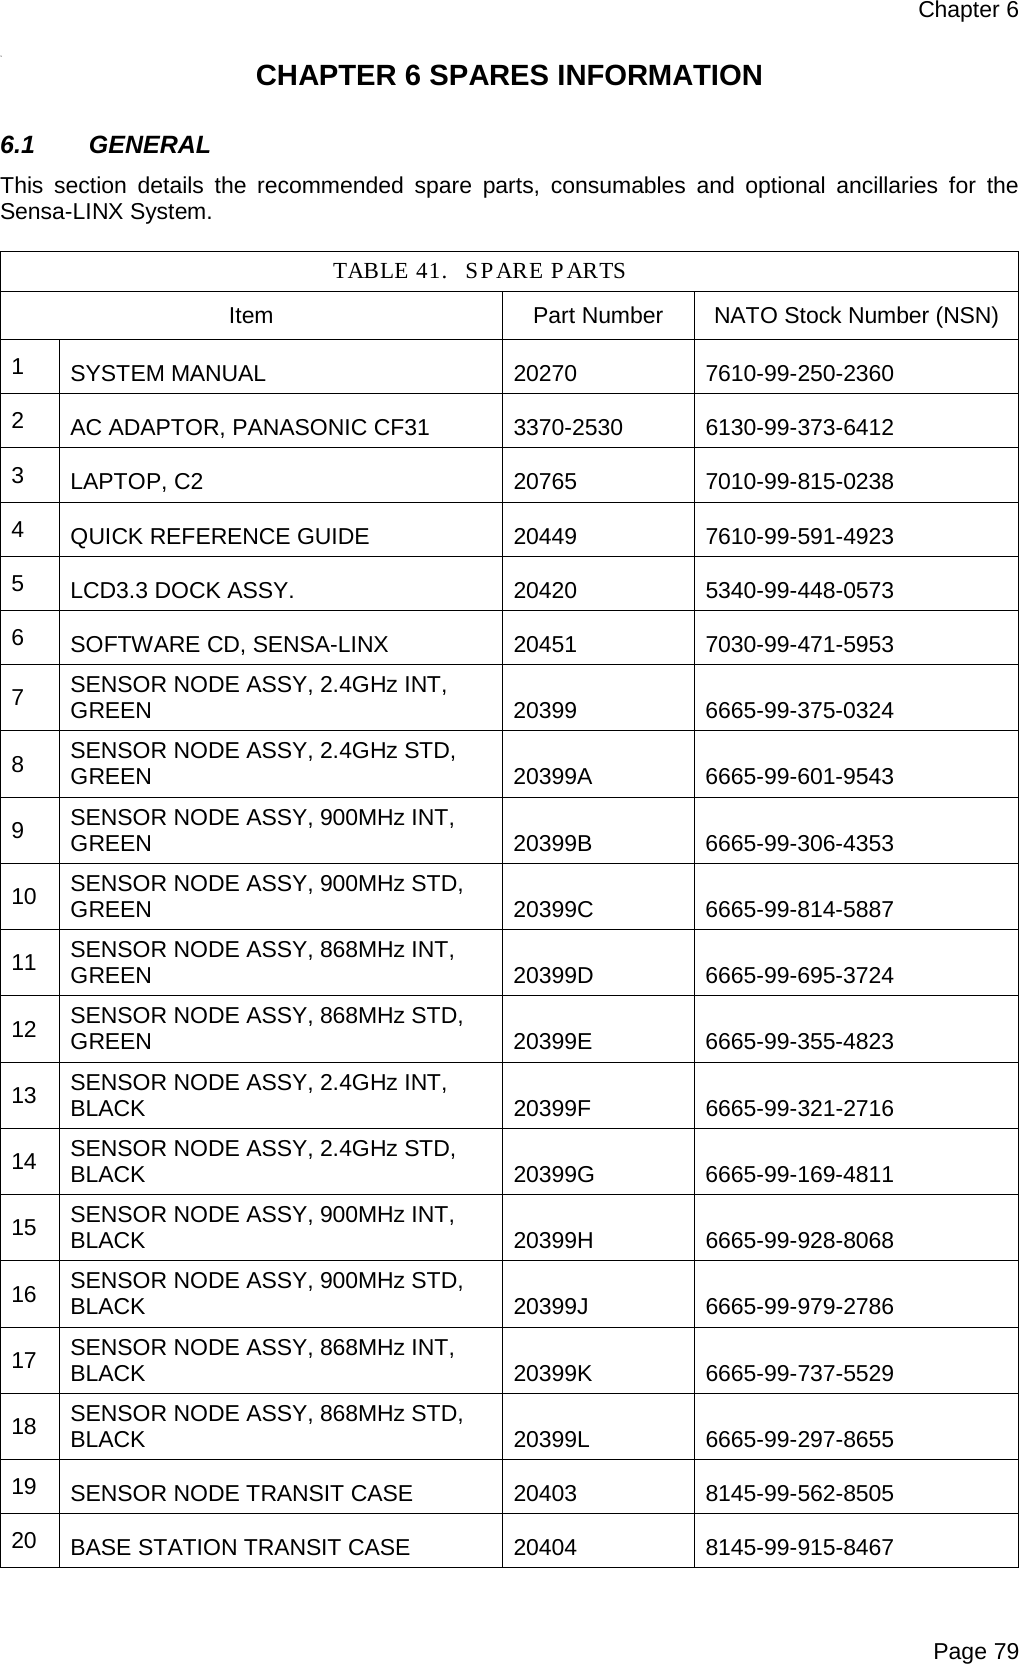 Chapter 6  Page 79  *5  CHAPTER 6 SPARES INFORMATION  6.1 GENERAL This section details the recommended spare parts, consumables and optional ancillaries for the Sensa-LINX System.  TABLE 41. SPARE P ARTS  Item Part Number NATO Stock Number (NSN)  1  SYSTEM MANUAL 20270 7610-99-250-2360 2  AC ADAPTOR, PANASONIC CF31 3370-2530 6130-99-373-6412 3  LAPTOP, C2 20765 7010-99-815-0238 4  QUICK REFERENCE GUIDE 20449 7610-99-591-4923 5  LCD3.3 DOCK ASSY. 20420 5340-99-448-0573 6  SOFTWARE CD, SENSA-LINX 20451 7030-99-471-5953 7  SENSOR NODE ASSY, 2.4GHz INT, GREEN 20399 6665-99-375-0324 8  SENSOR NODE ASSY, 2.4GHz STD, GREEN 20399A 6665-99-601-9543 9  SENSOR NODE ASSY, 900MHz INT, GREEN 20399B 6665-99-306-4353 10 SENSOR NODE ASSY, 900MHz STD, GREEN 20399C 6665-99-814-5887 11 SENSOR NODE ASSY, 868MHz INT, GREEN 20399D 6665-99-695-3724 12 SENSOR NODE ASSY, 868MHz STD, GREEN 20399E 6665-99-355-4823 13 SENSOR NODE ASSY, 2.4GHz INT, BLACK 20399F 6665-99-321-2716 14 SENSOR NODE ASSY, 2.4GHz STD, BLACK 20399G 6665-99-169-4811 15 SENSOR NODE ASSY, 900MHz INT, BLACK 20399H 6665-99-928-8068 16 SENSOR NODE ASSY, 900MHz STD, BLACK 20399J 6665-99-979-2786 17 SENSOR NODE ASSY, 868MHz INT, BLACK 20399K 6665-99-737-5529 18 SENSOR NODE ASSY, 868MHz STD, BLACK 20399L 6665-99-297-8655 19 SENSOR NODE TRANSIT CASE 20403 8145-99-562-8505 20 BASE STATION TRANSIT CASE 20404 8145-99-915-8467 